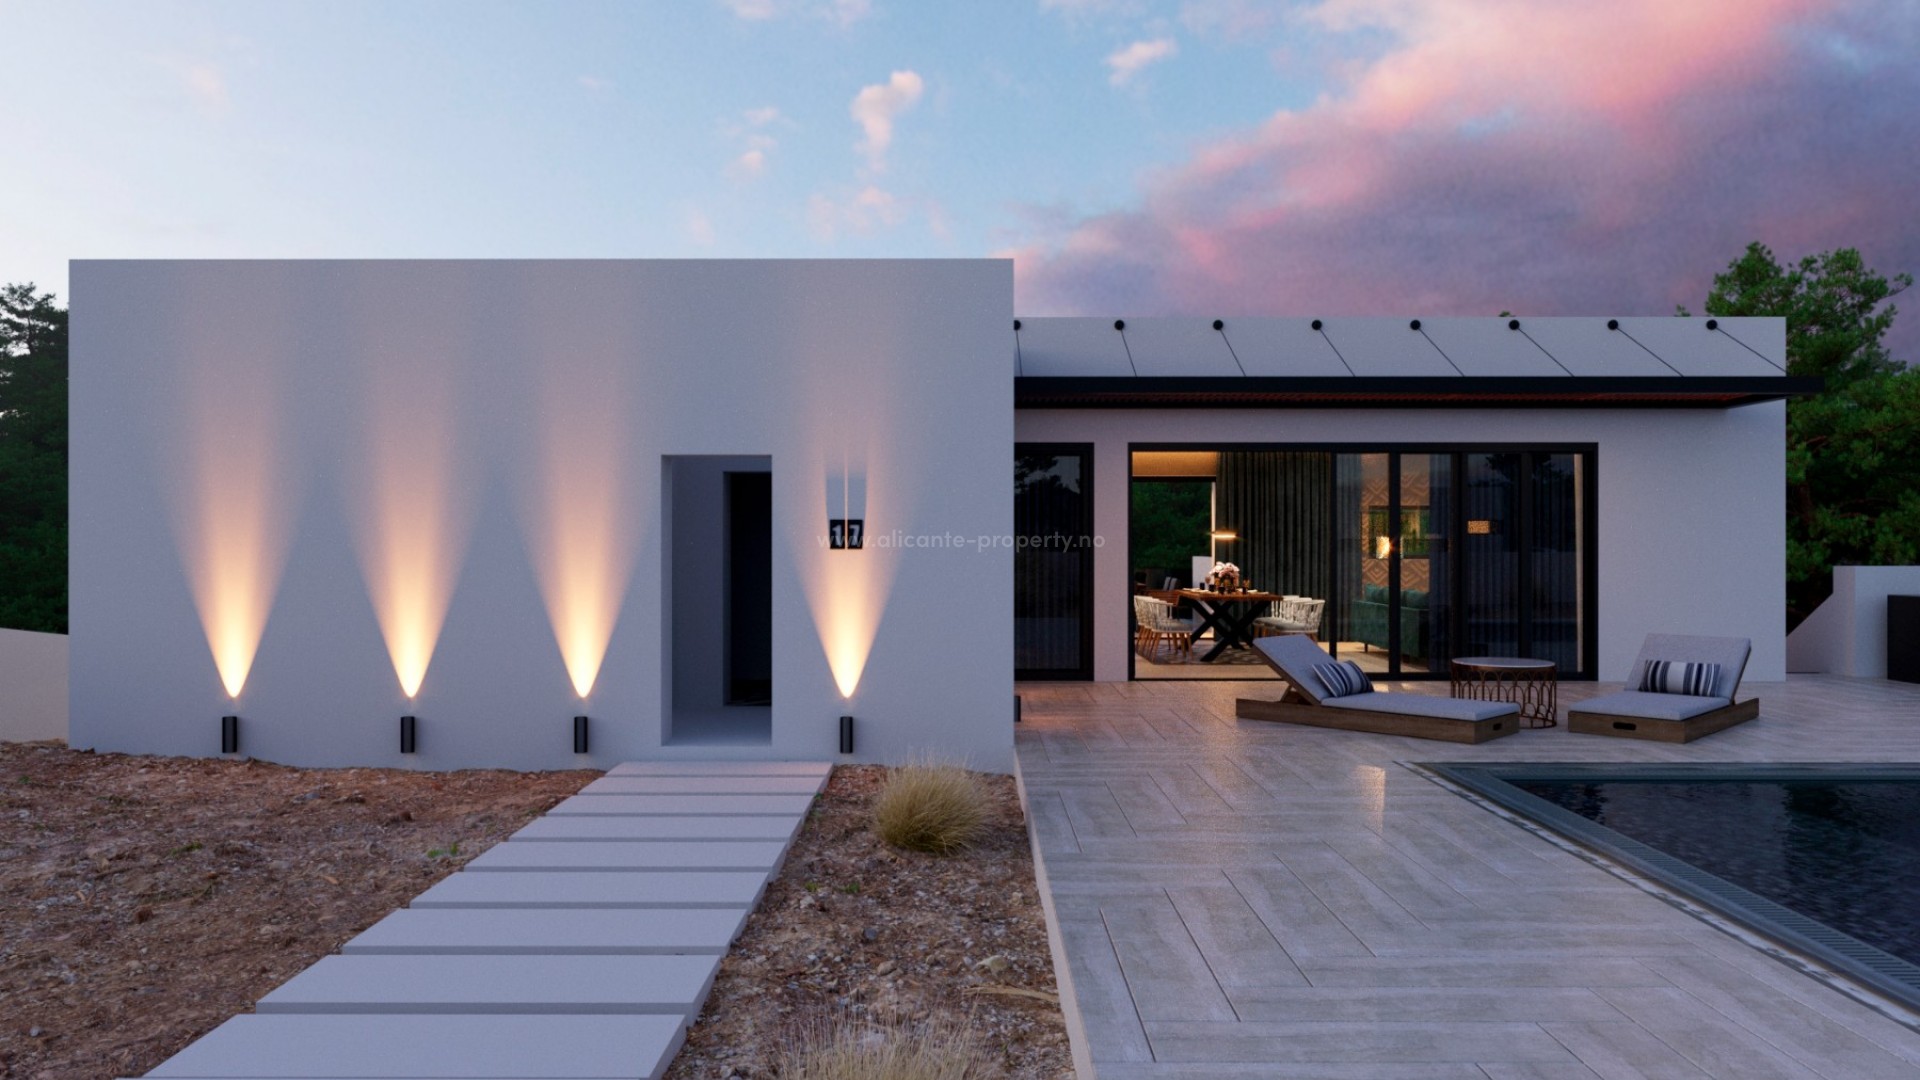 New built luxury villa In Las Colinas Golf, Alicante province only 40min from Alicante airport, 3 bedrooms, 3 bathrooms, private pool, large terrace